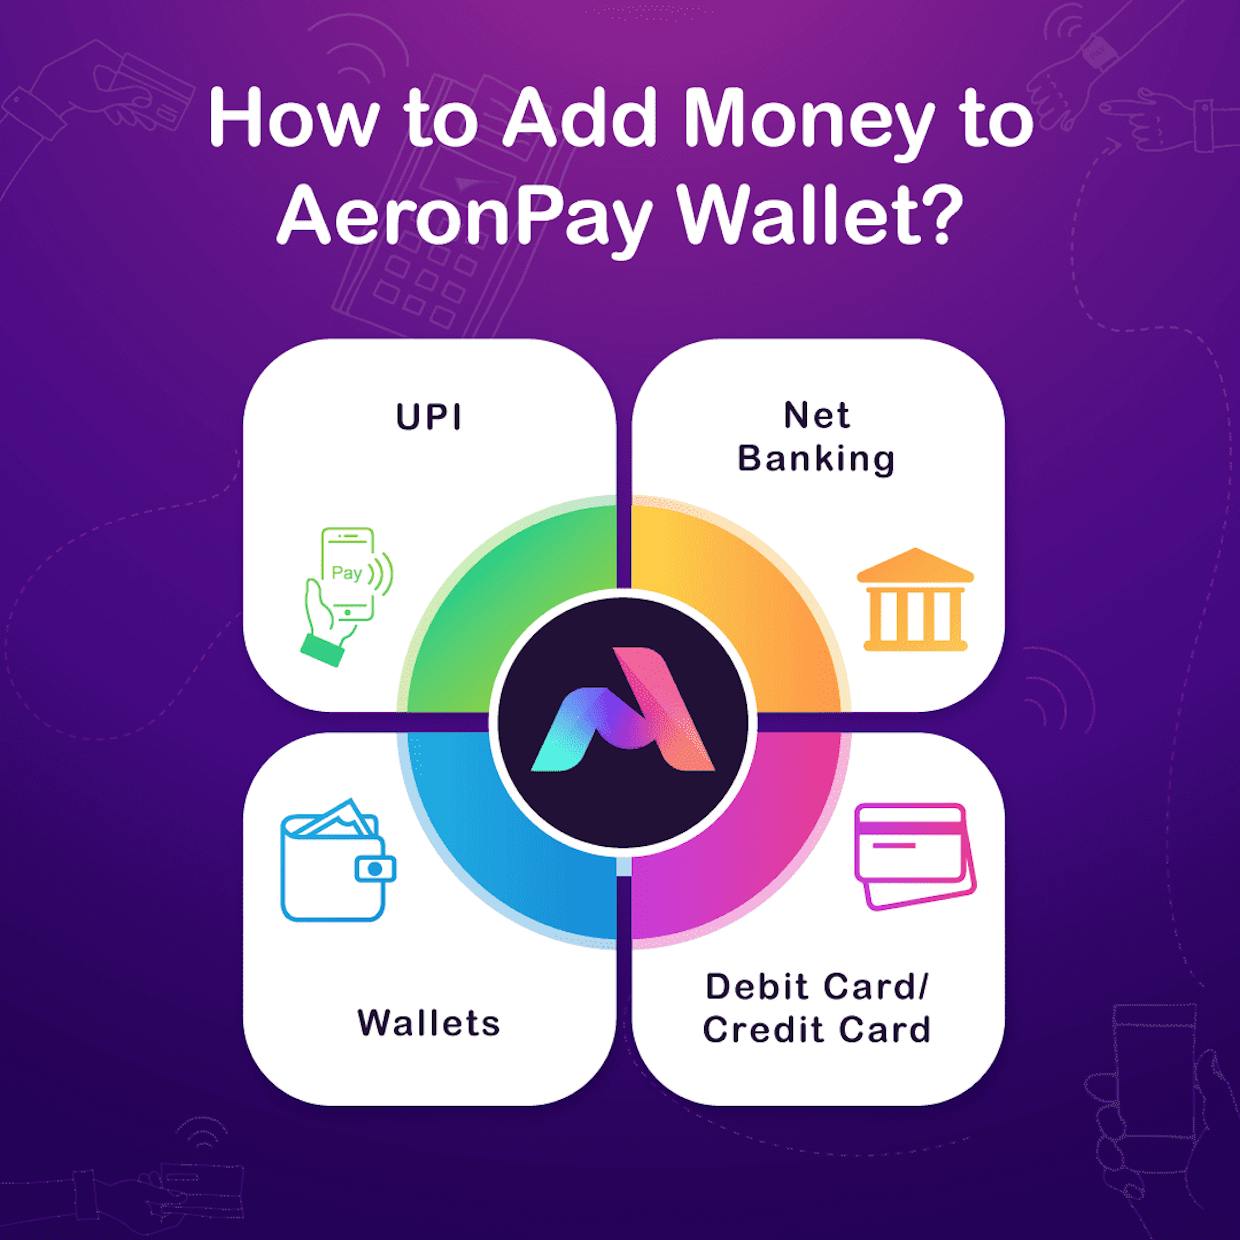 How to Add Money to AeronPay Wallet